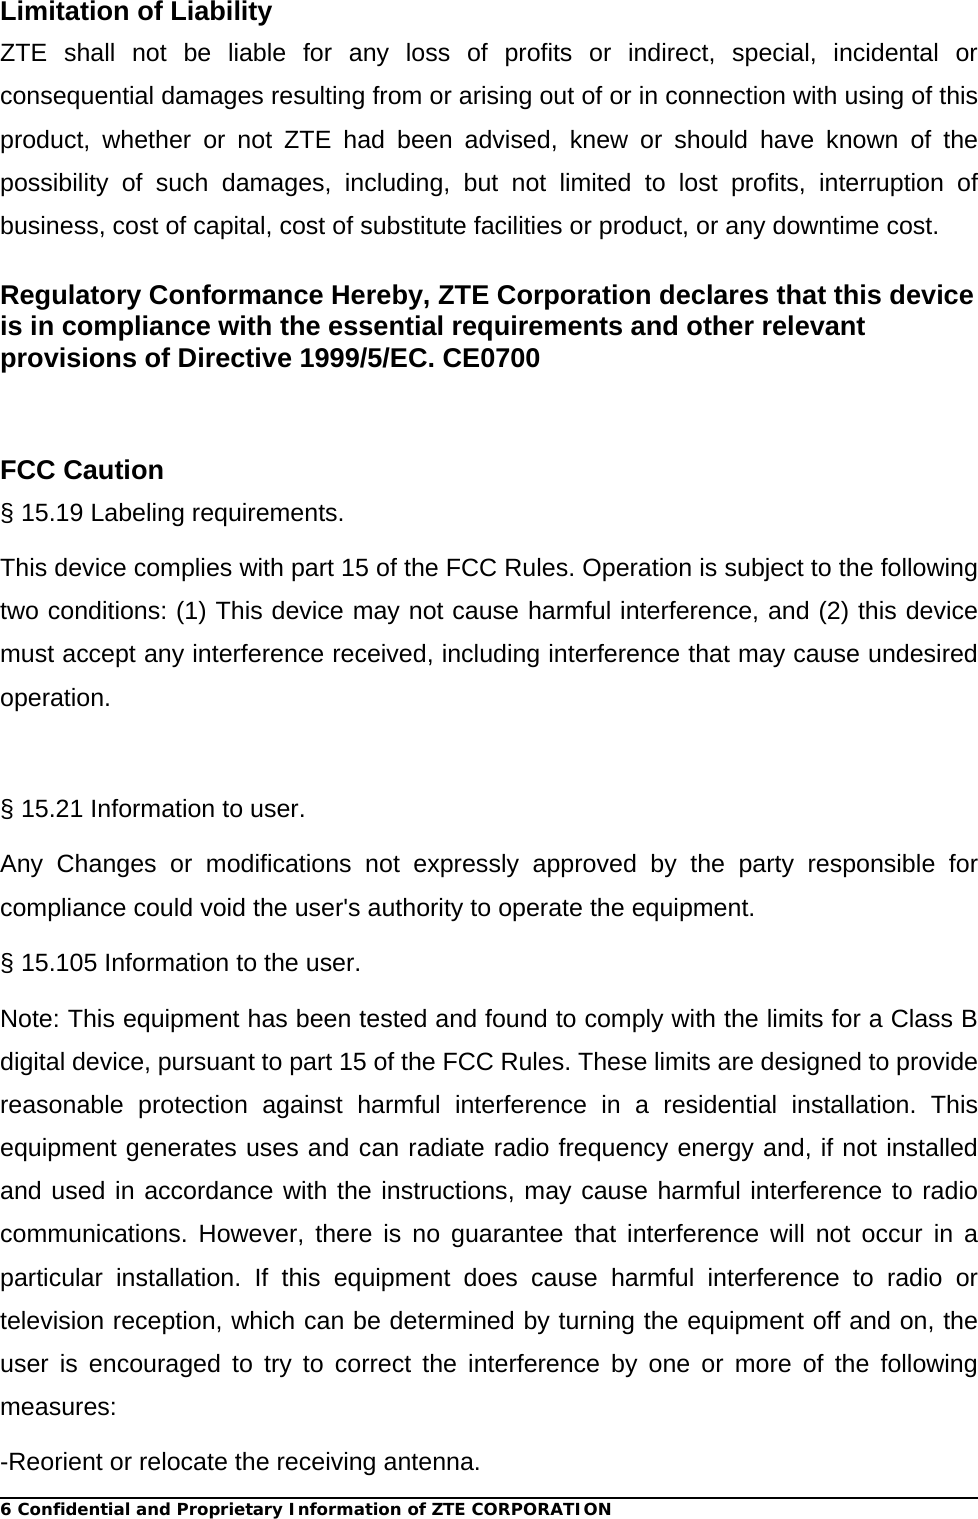 6 Confidential and Proprietary Information of ZTE CORPORATIONLimitation of Liability ZTE shall not be liable for any loss of profits or indirect, special, incidental or consequential damages resulting from or arising out of or in connection with using of this product, whether or not ZTE had been advised, knew or should have known of the possibility of such damages, including, but not limited to lost profits, interruption of business, cost of capital, cost of substitute facilities or product, or any downtime cost. Regulatory Conformance Hereby, ZTE Corporation declares that this device is in compliance with the essential requirements and other relevant provisions of Directive 1999/5/EC. CE0700   FCC Caution   § 15.19 Labeling requirements. This device complies with part 15 of the FCC Rules. Operation is subject to the following two conditions: (1) This device may not cause harmful interference, and (2) this device must accept any interference received, including interference that may cause undesired operation.  § 15.21 Information to user. Any Changes or modifications not expressly approved by the party responsible for compliance could void the user&apos;s authority to operate the equipment.   § 15.105 Information to the user. Note: This equipment has been tested and found to comply with the limits for a Class B digital device, pursuant to part 15 of the FCC Rules. These limits are designed to provide reasonable protection against harmful interference in a residential installation. This equipment generates uses and can radiate radio frequency energy and, if not installed and used in accordance with the instructions, may cause harmful interference to radio communications. However, there is no guarantee that interference will not occur in a particular installation. If this equipment does cause harmful interference to radio or television reception, which can be determined by turning the equipment off and on, the user is encouraged to try to correct the interference by one or more of the following measures: -Reorient or relocate the receiving antenna. 